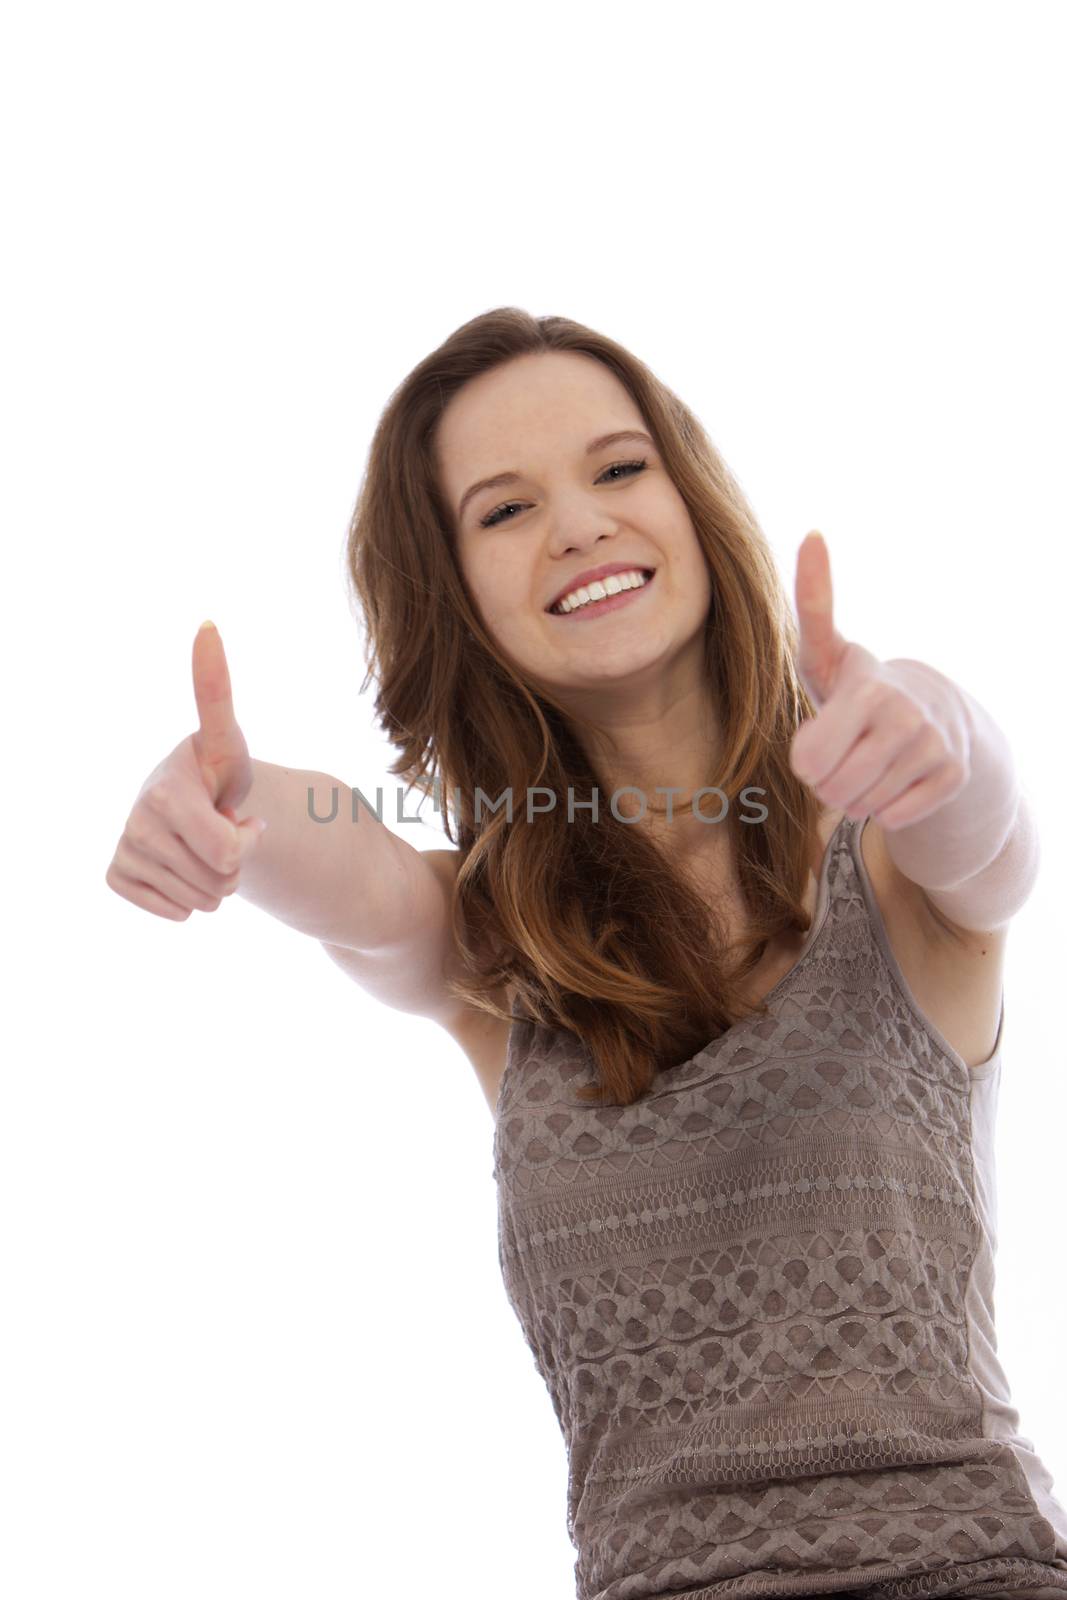 Vivacious teenager giving a thums up gesture with both hands to signify her approval, success and optimism isolated on white